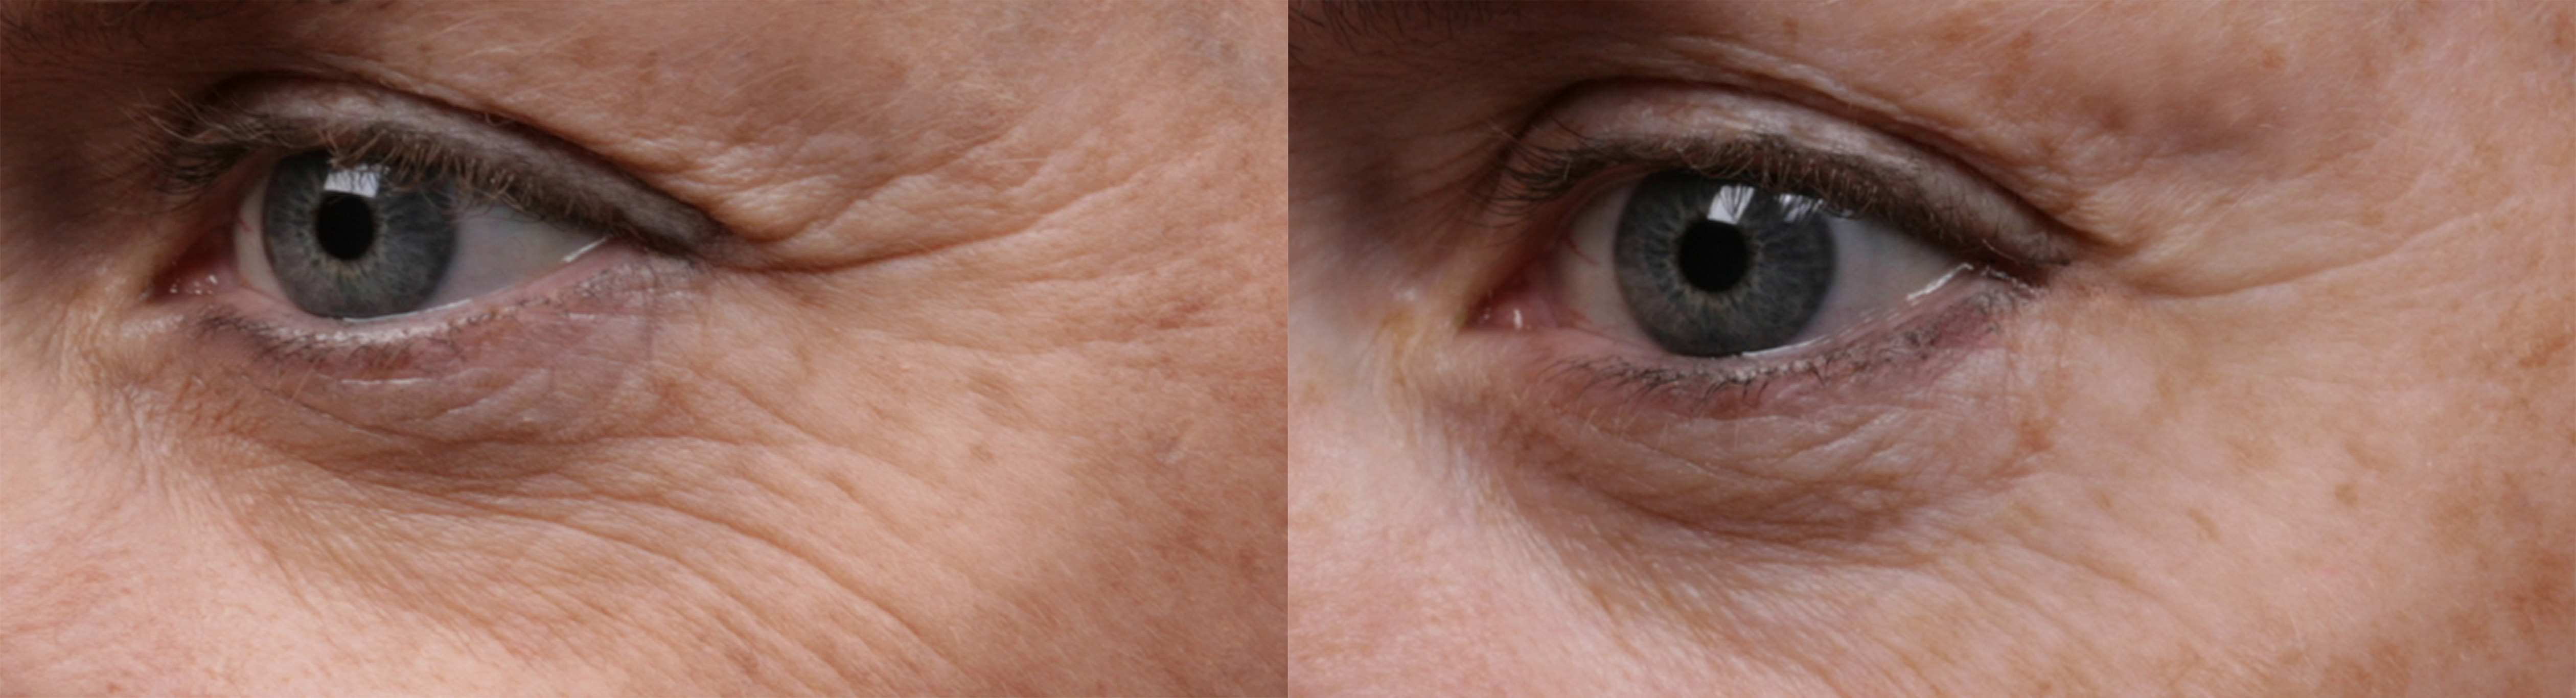 SilcSkin_Eyes_before_and_after